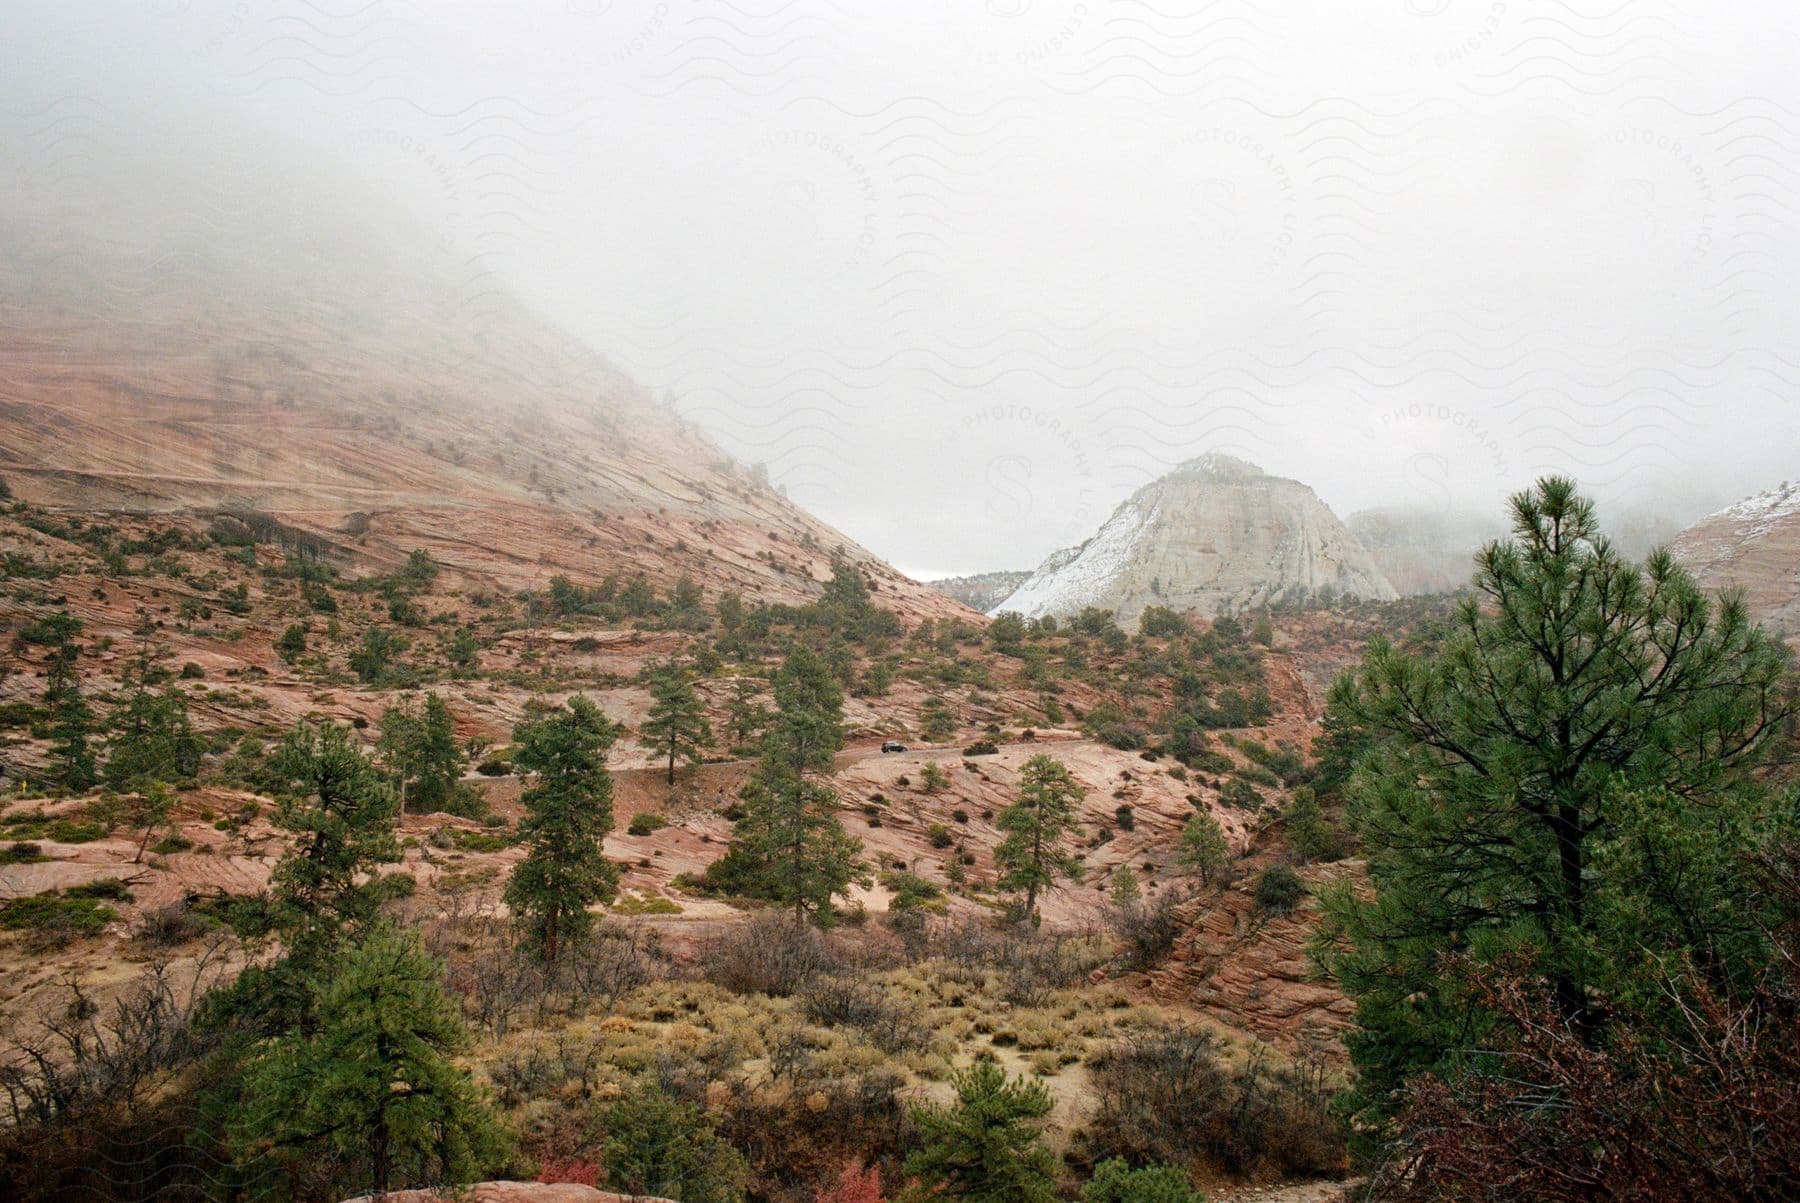 Misty view of a layered rock hillside with scattered pine trees and a dusting of snow on the peak under a cloudy sky.